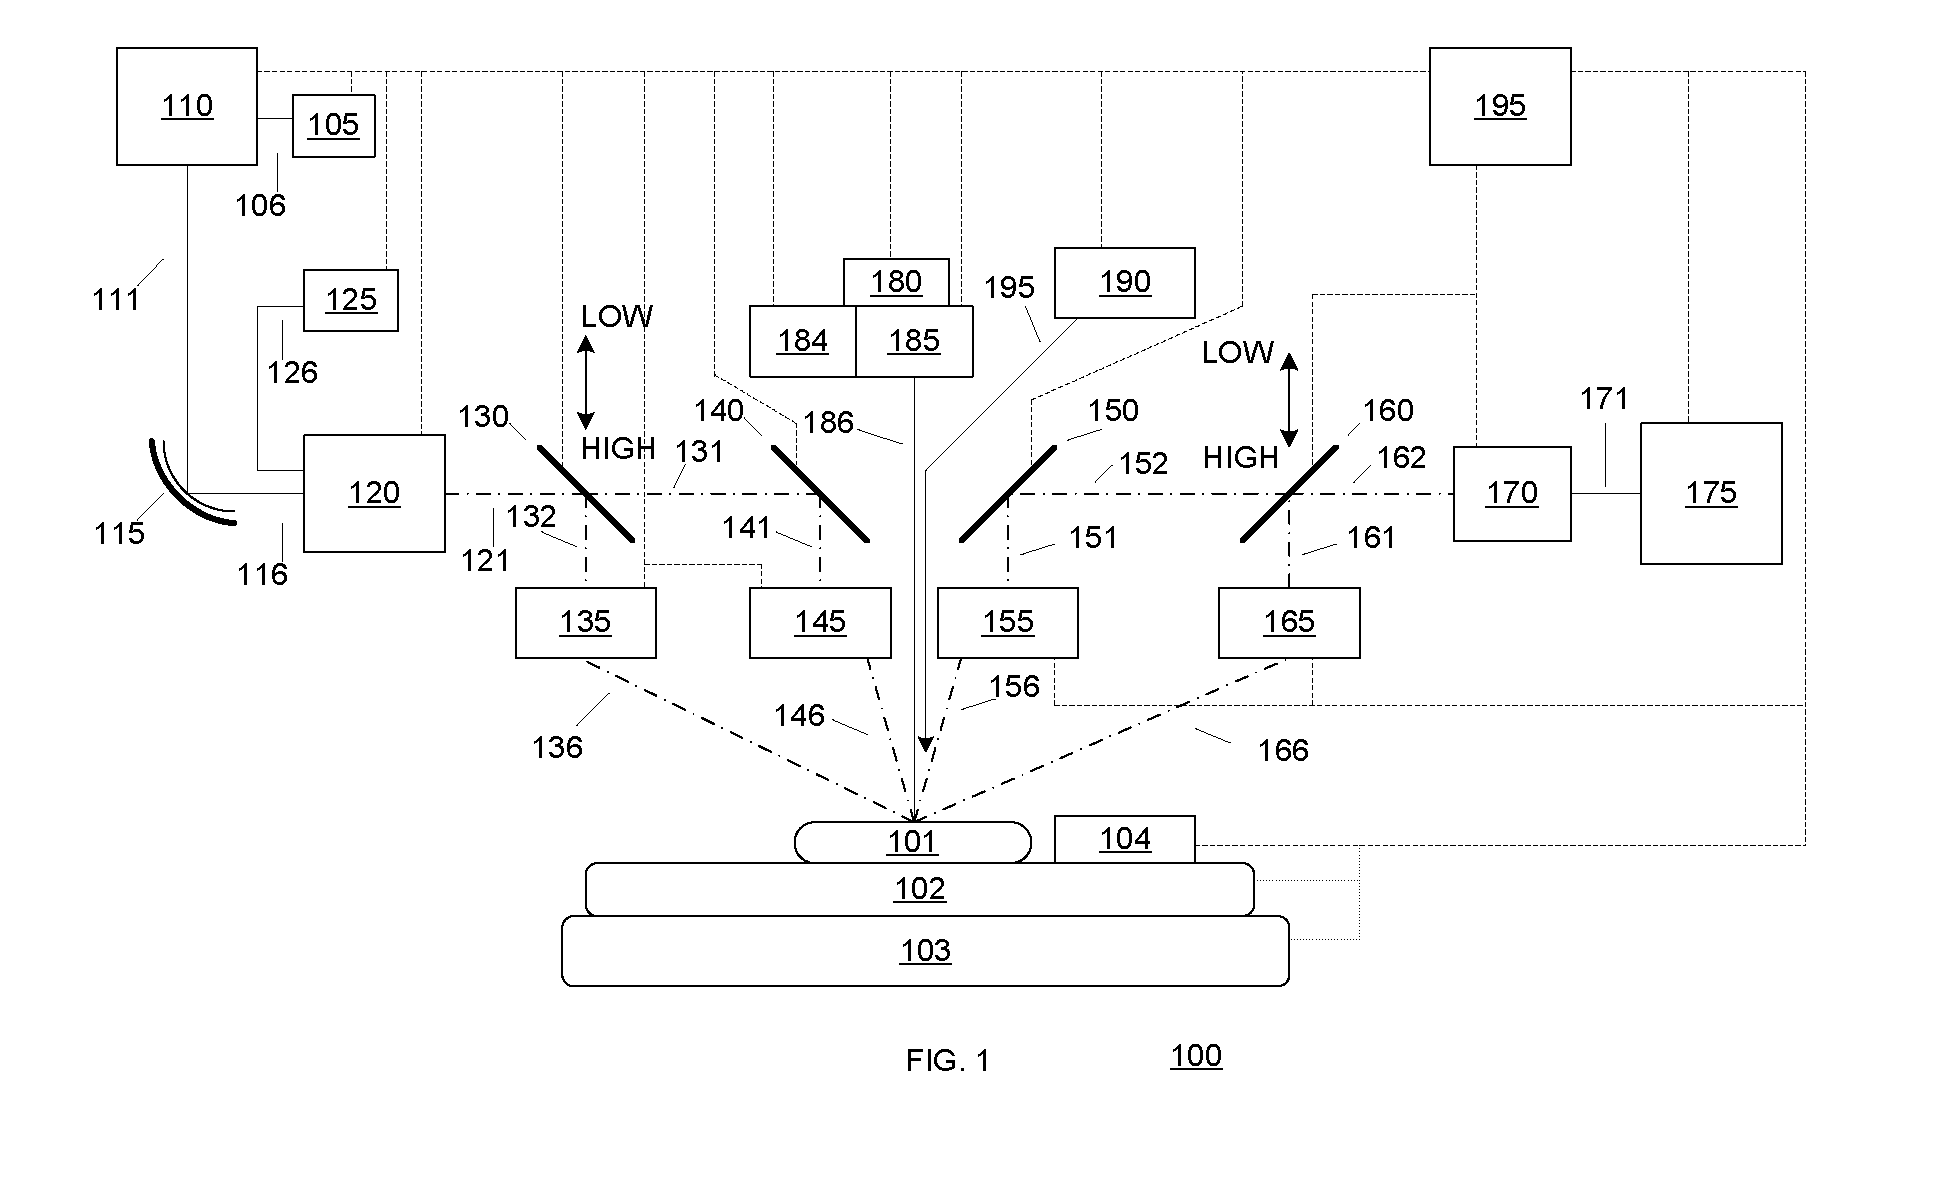 Pre-Aligned Metrology System and Modules